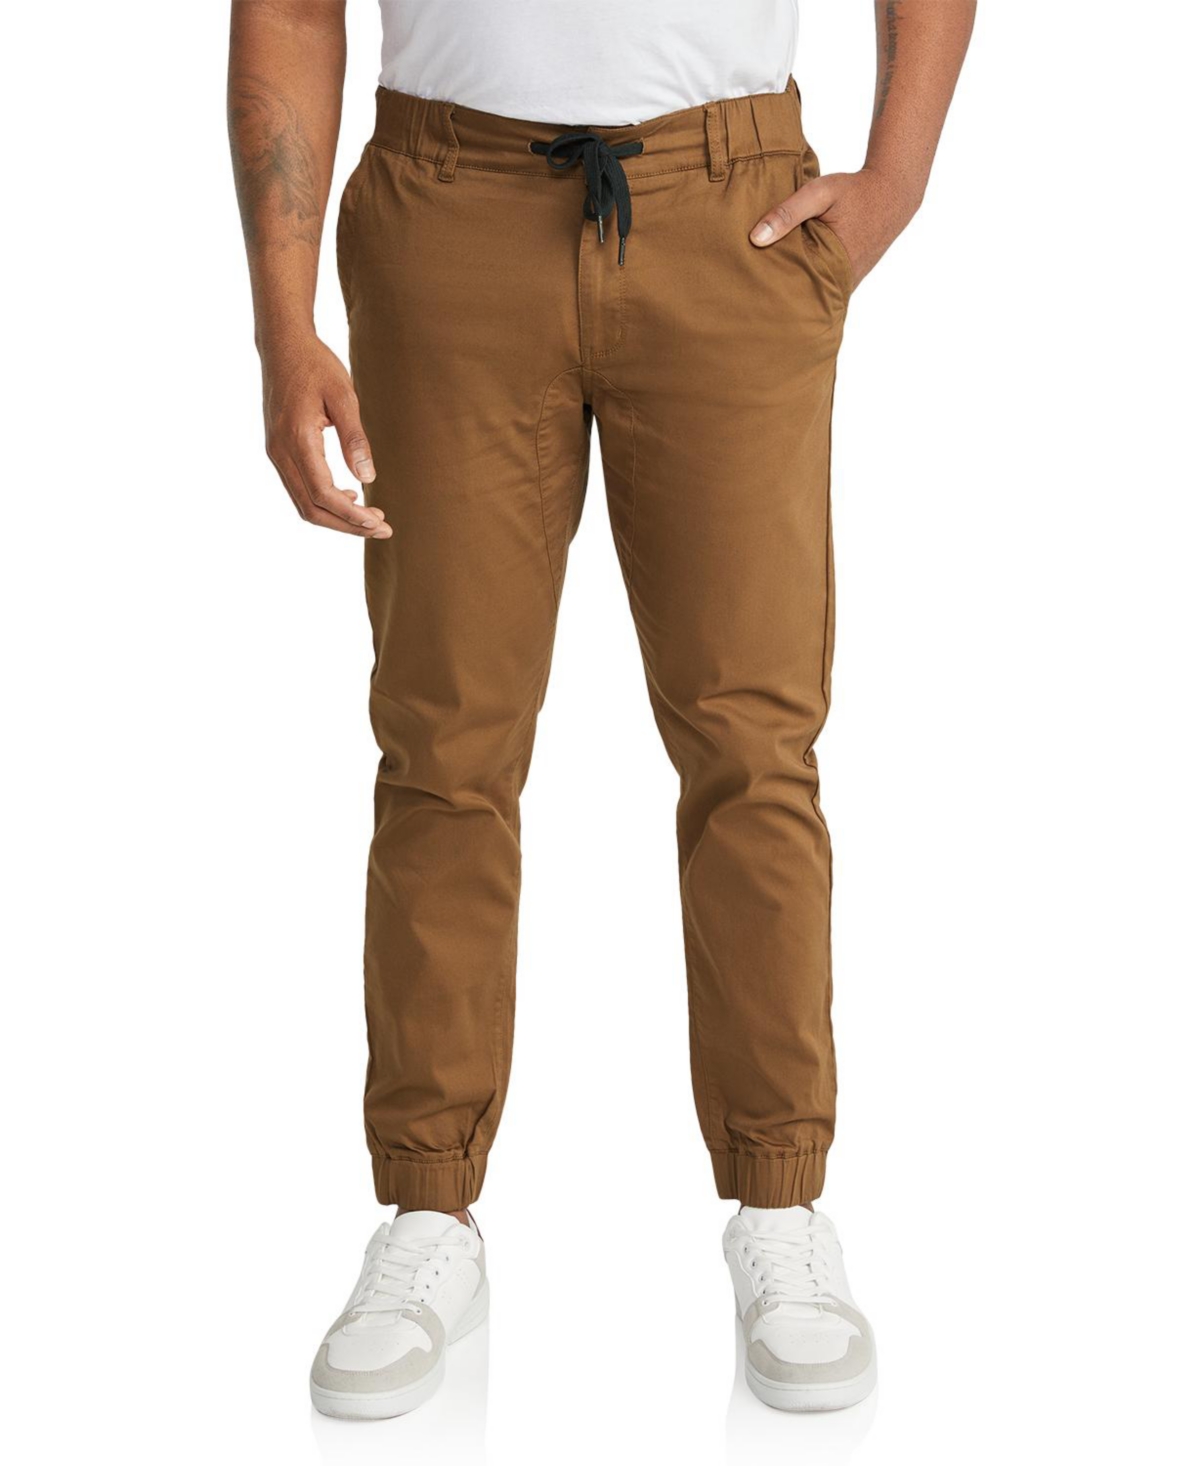 Men's Comfort Knit Jogger Pant - Toffee